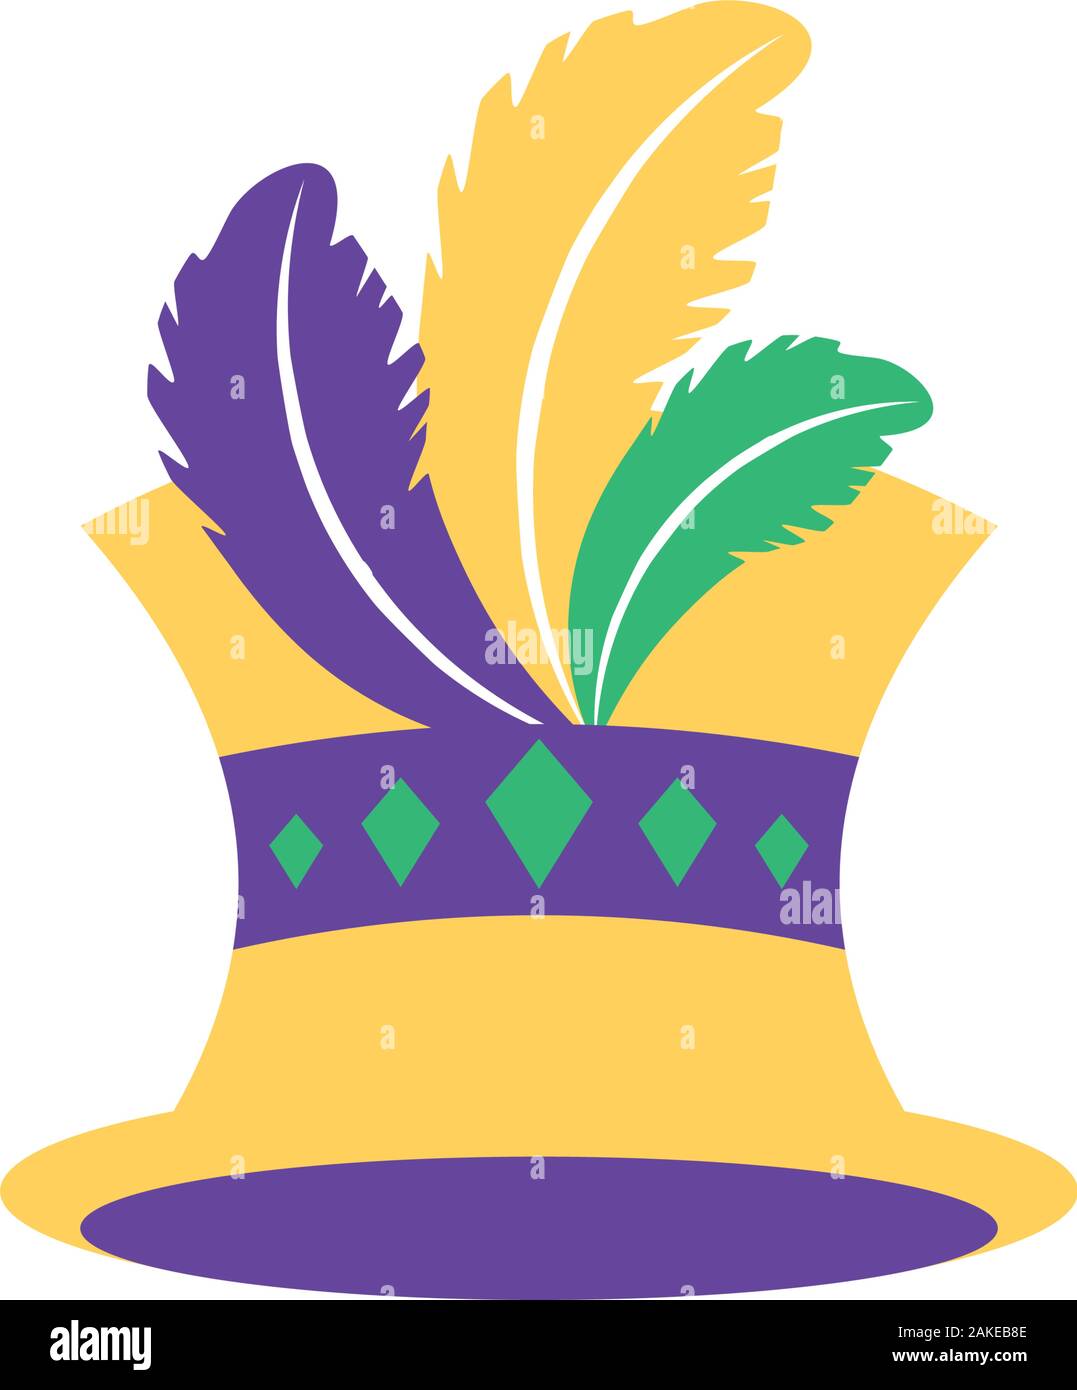 Mardi Gras Feathers Design, Party Carnival Decoration Celebration Festival  Holiday Fun New Orleans And Traditional Theme Vector Illustration Royalty  Free SVG, Cliparts, Vectors, and Stock Illustration. Image 145349139.